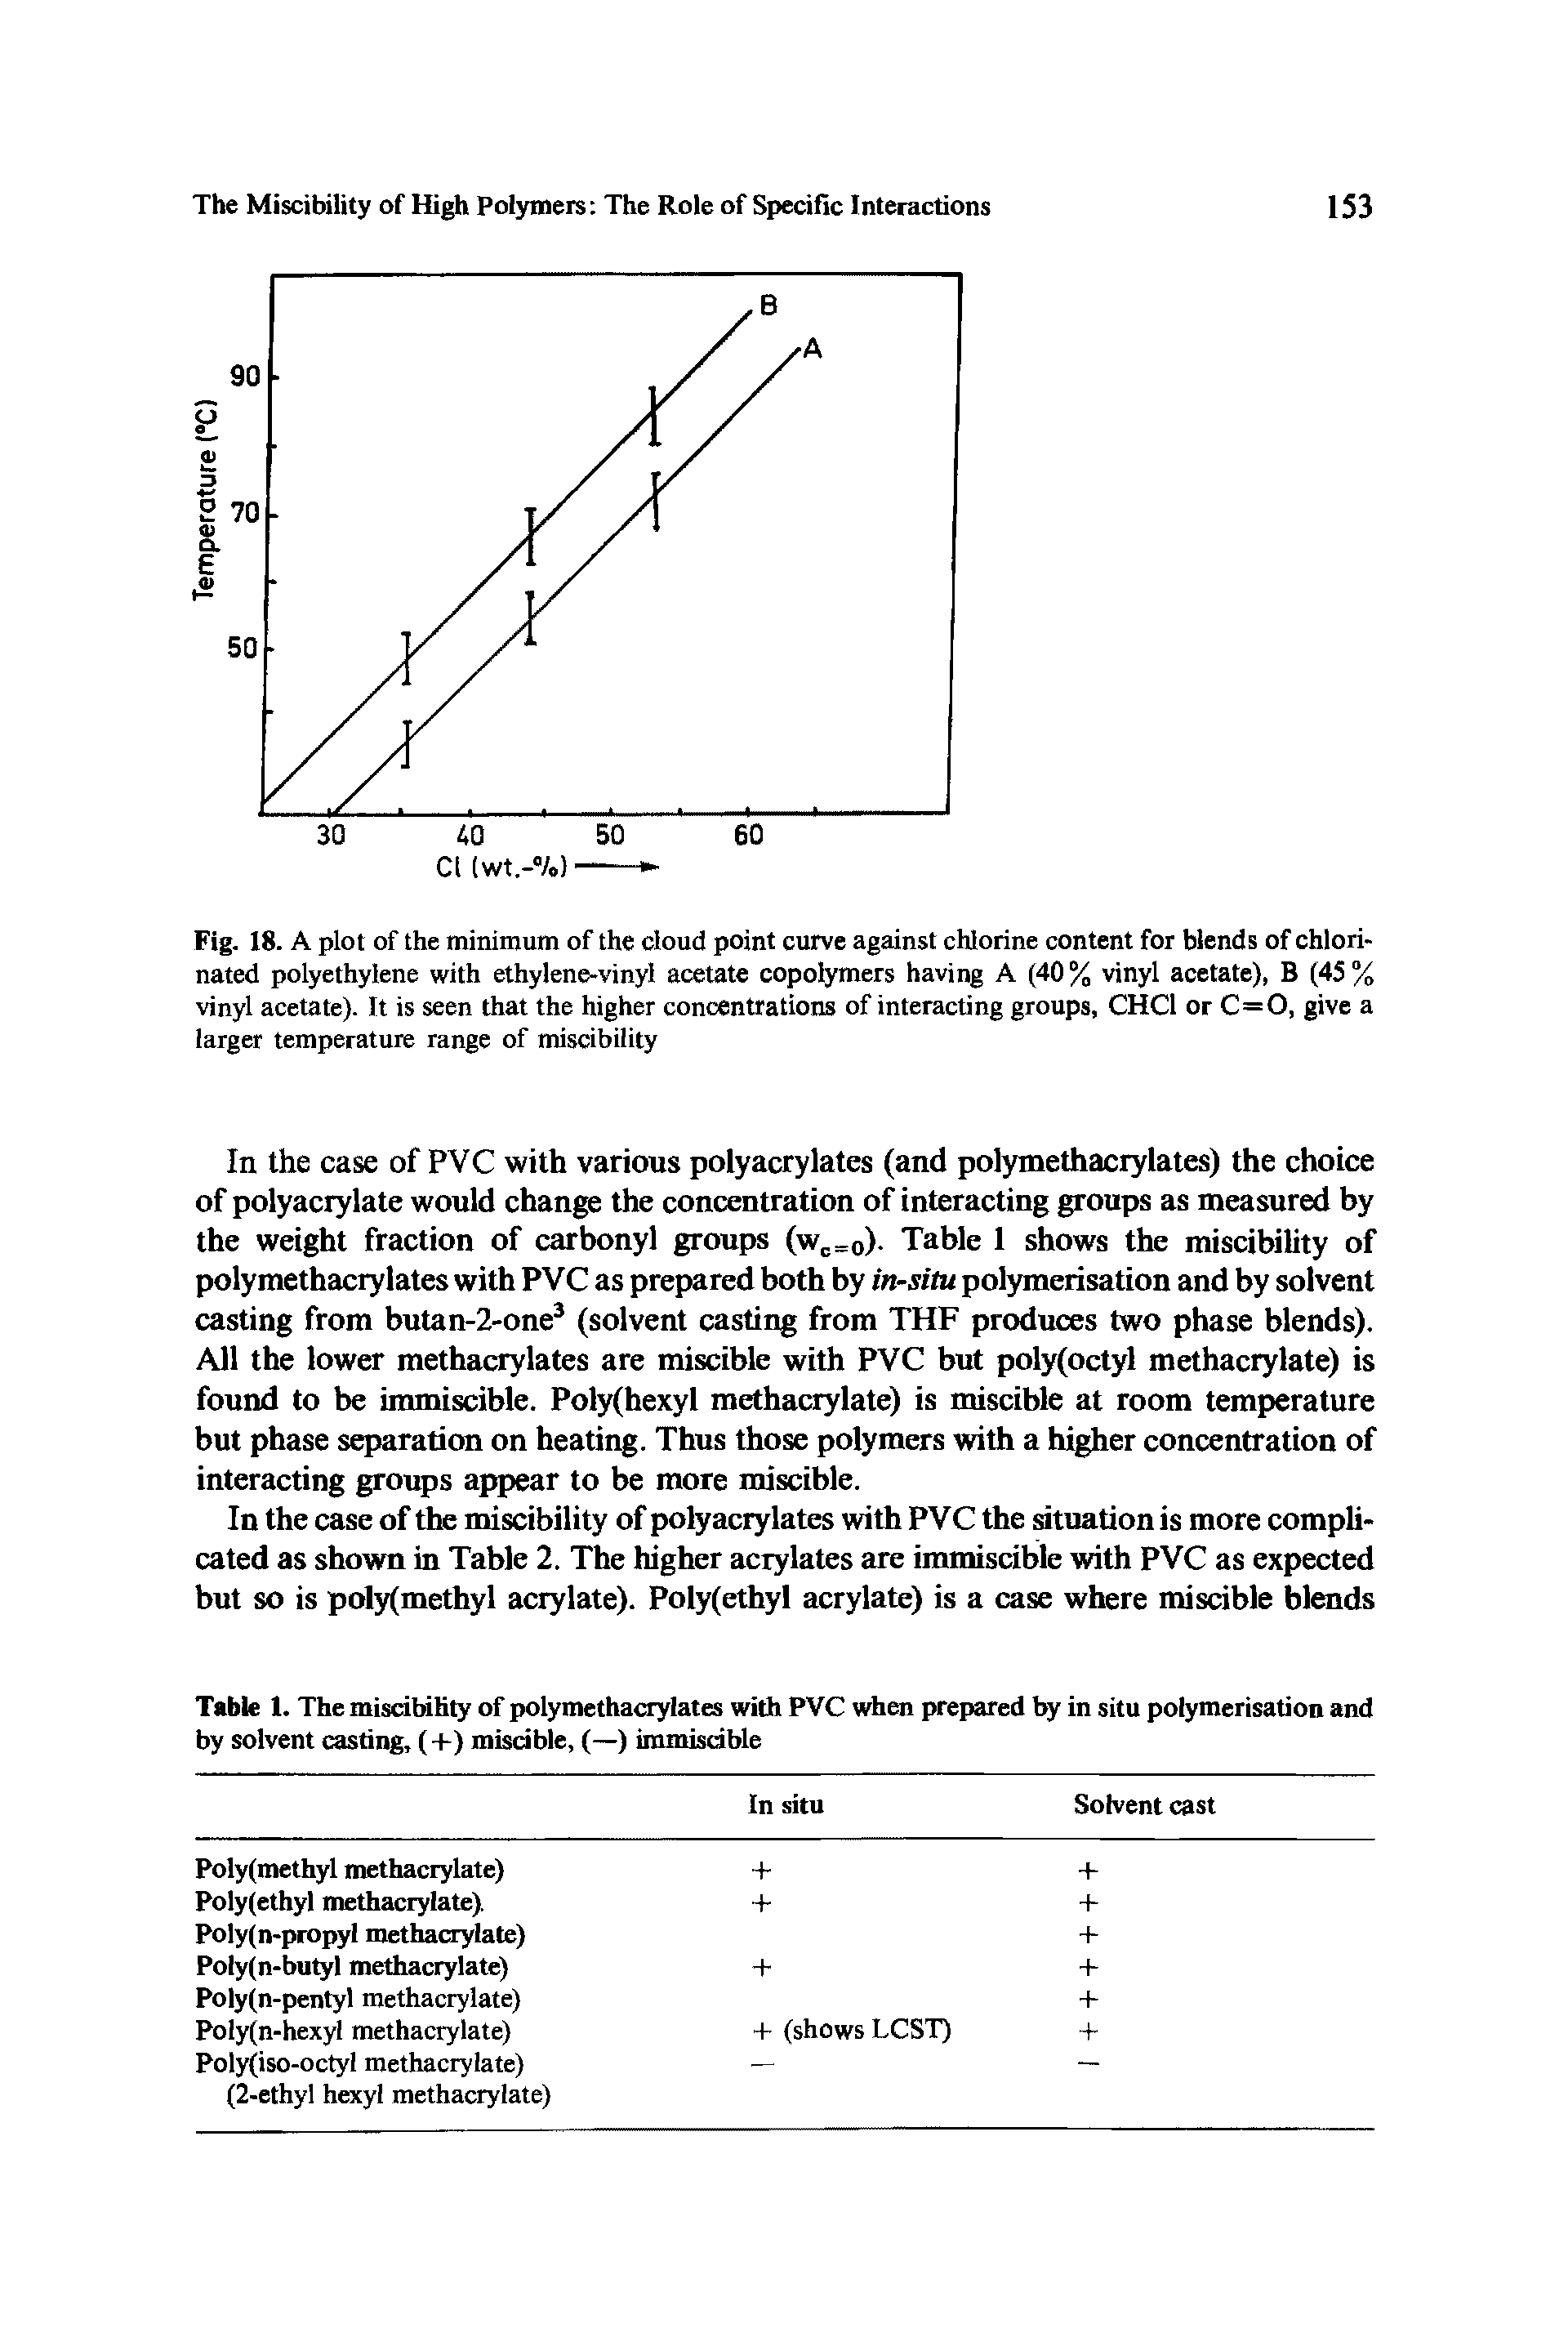 Fig. 18. A plot of the minimum of the cloud point curve against chlorine content for blends of chlorinated polyethylene with ethylene-vinyl acetate copolymers having A (40 % vinyl acetate), B (45 % vinyl acetate). It is seen that the higher concentrations of interacting groups, CHCl or C=0, give a larger temperature range of miscibility...